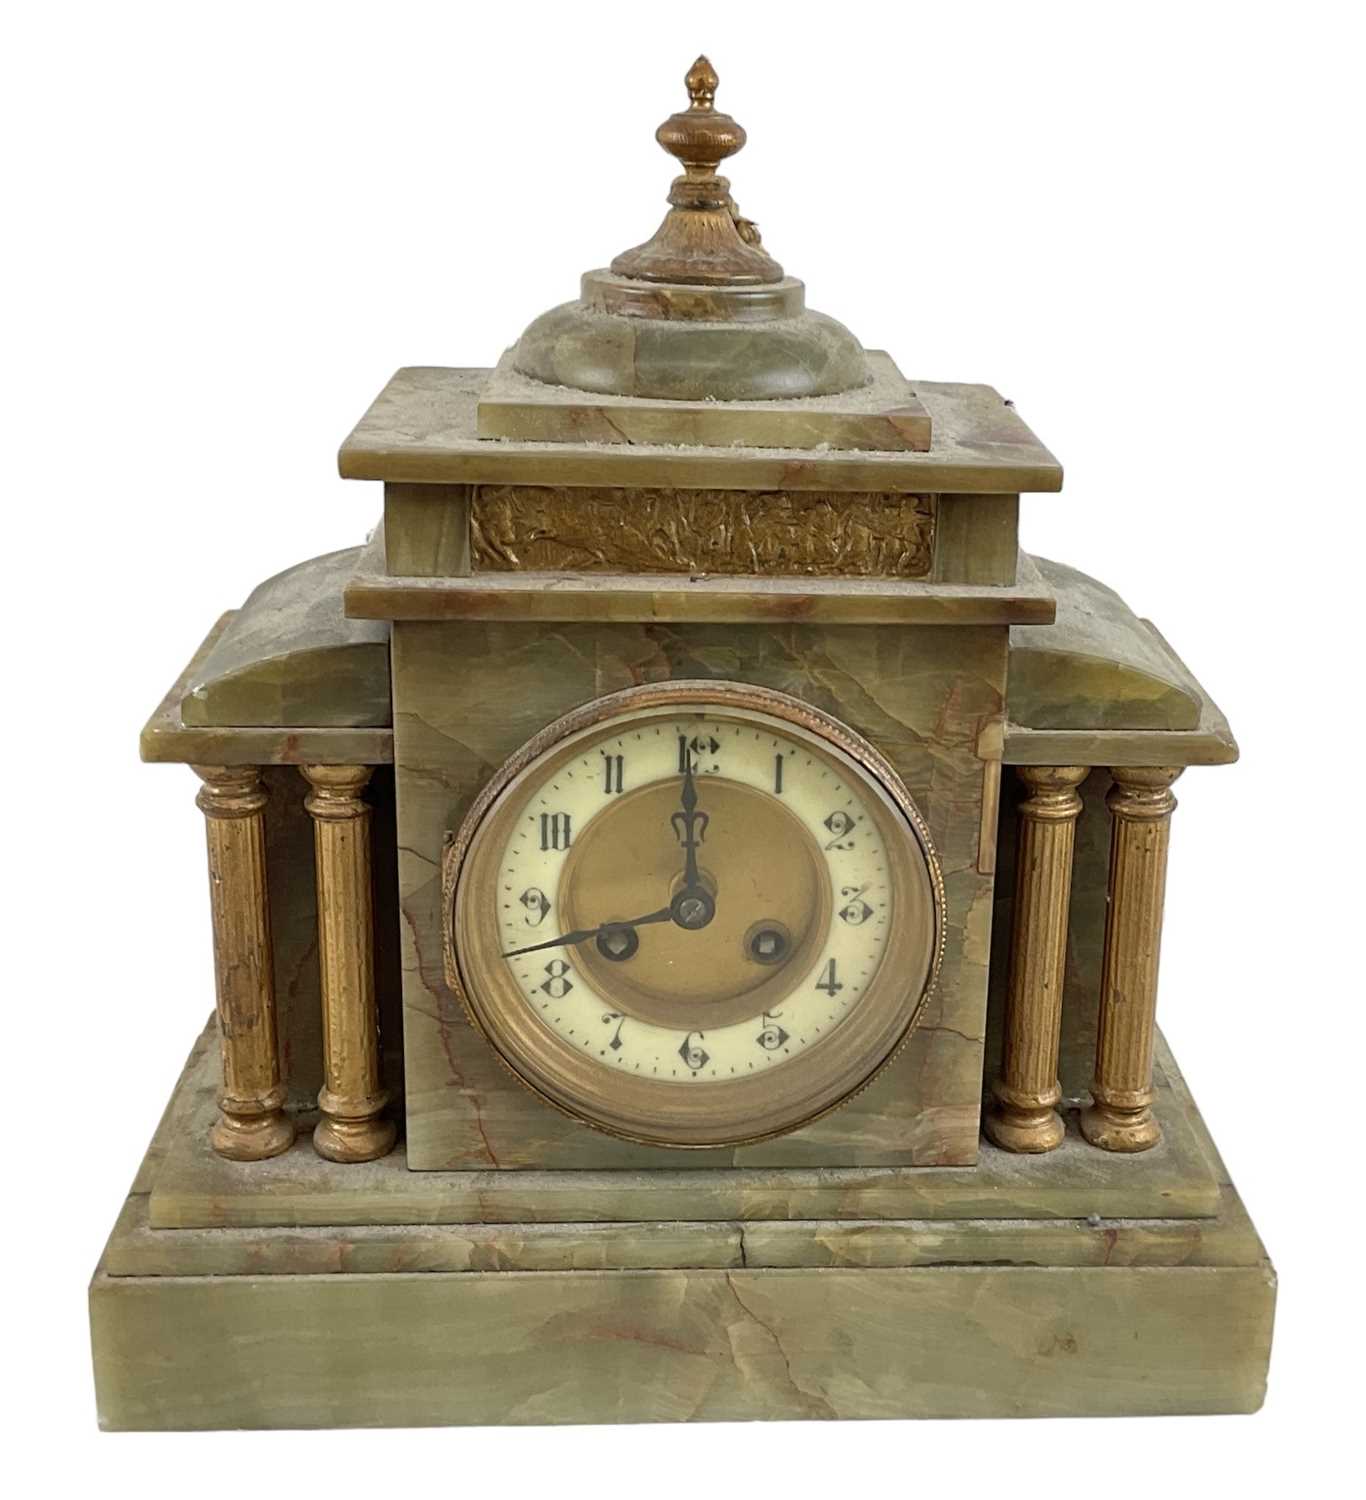 A late 19th century French onyx mantel clock with white enamel dial, height 32cm, width 29cm.